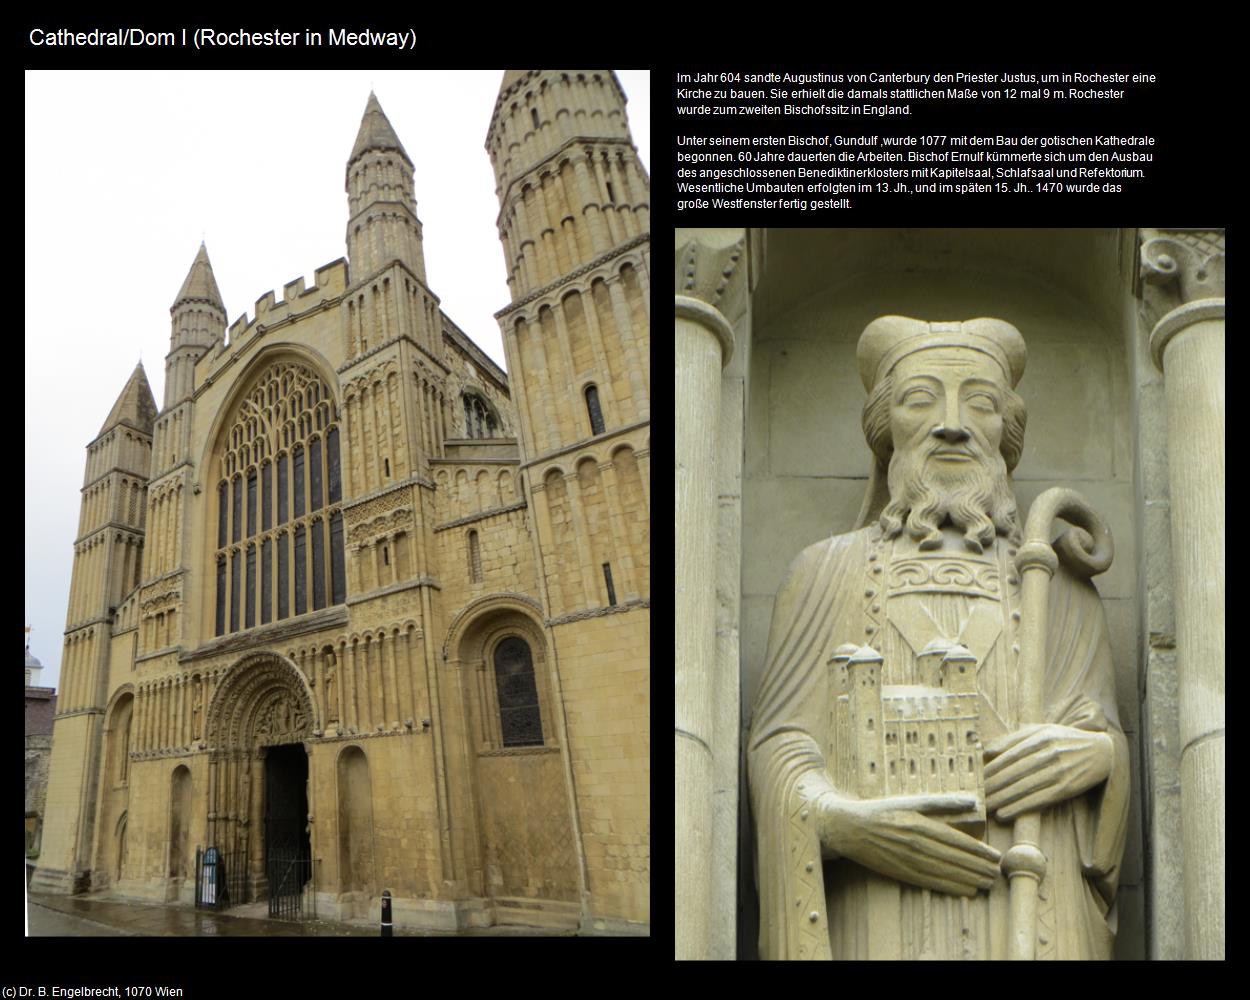 Cathedral/Dom I (Rochester in Medway, England) in Kulturatlas-ENGLAND und WALES